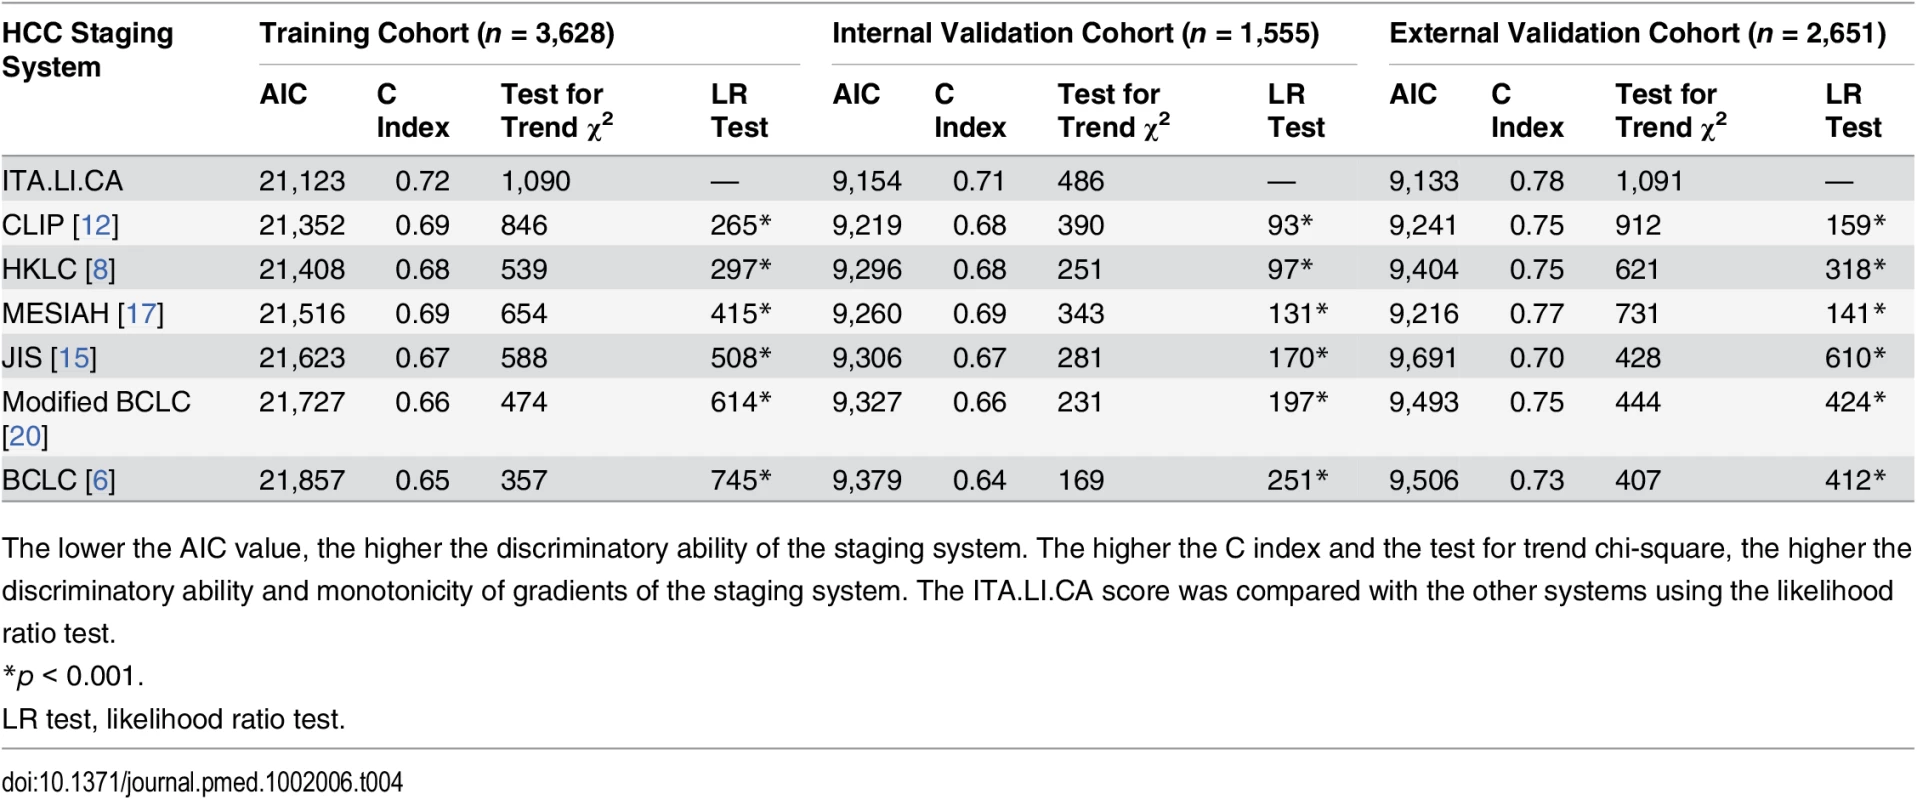 Discrimination ability of the integrated ITA.LI.CA prognostic system and comparison with other staging systems in the training, internal validation, and external validation cohorts.